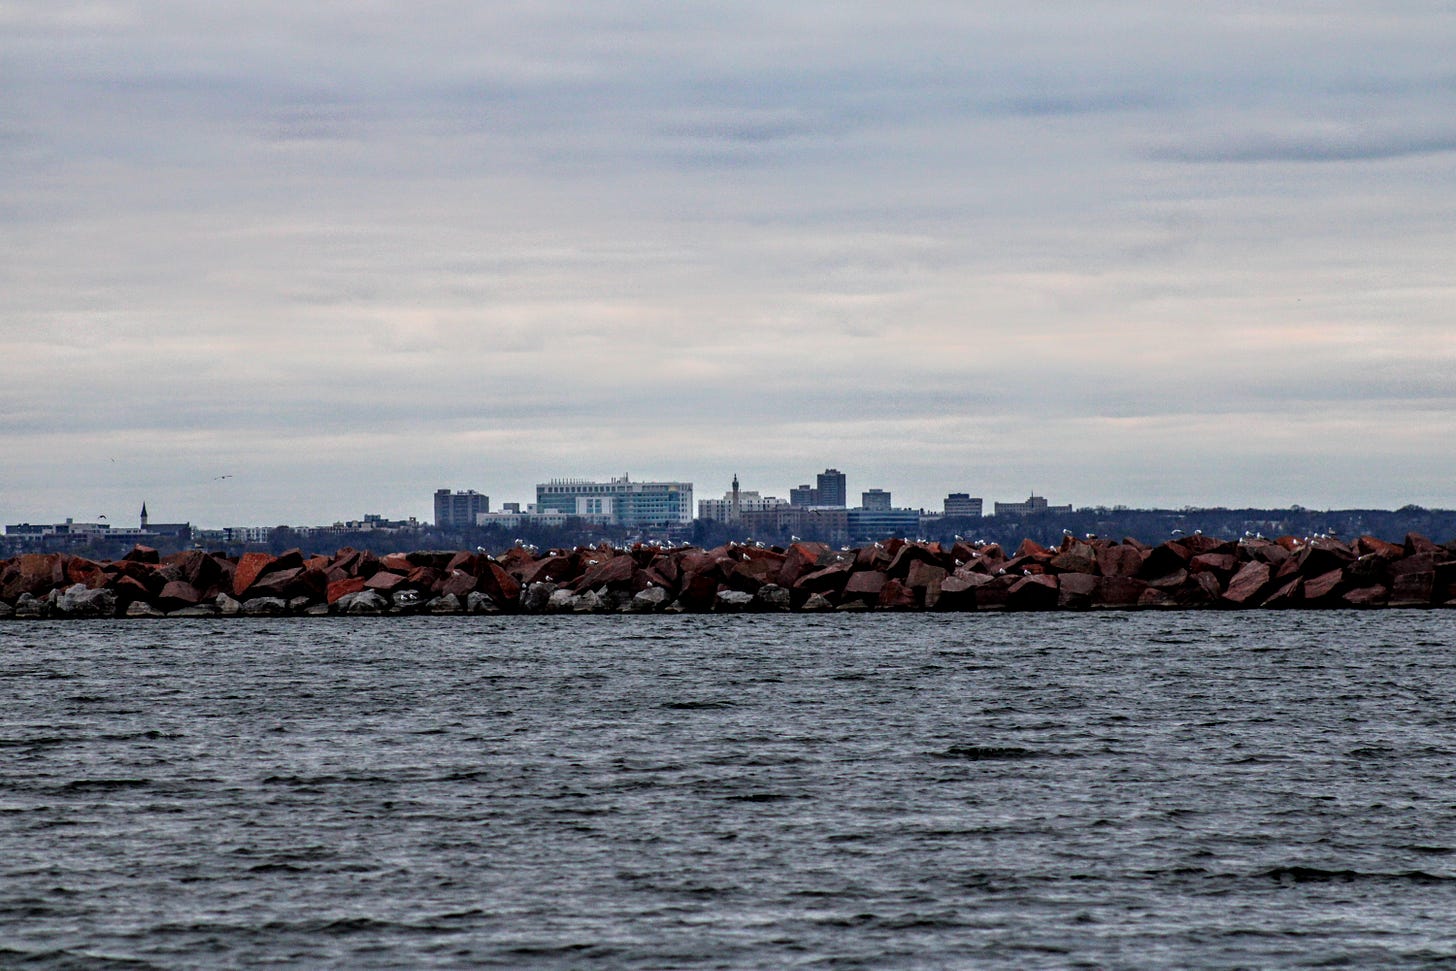 A photograph with Lake Michigan in the foreground. In the midground is a reddish rock breaker with many seagulls perched on the rocks. In the distance is Milwaukee, Wisconsin.